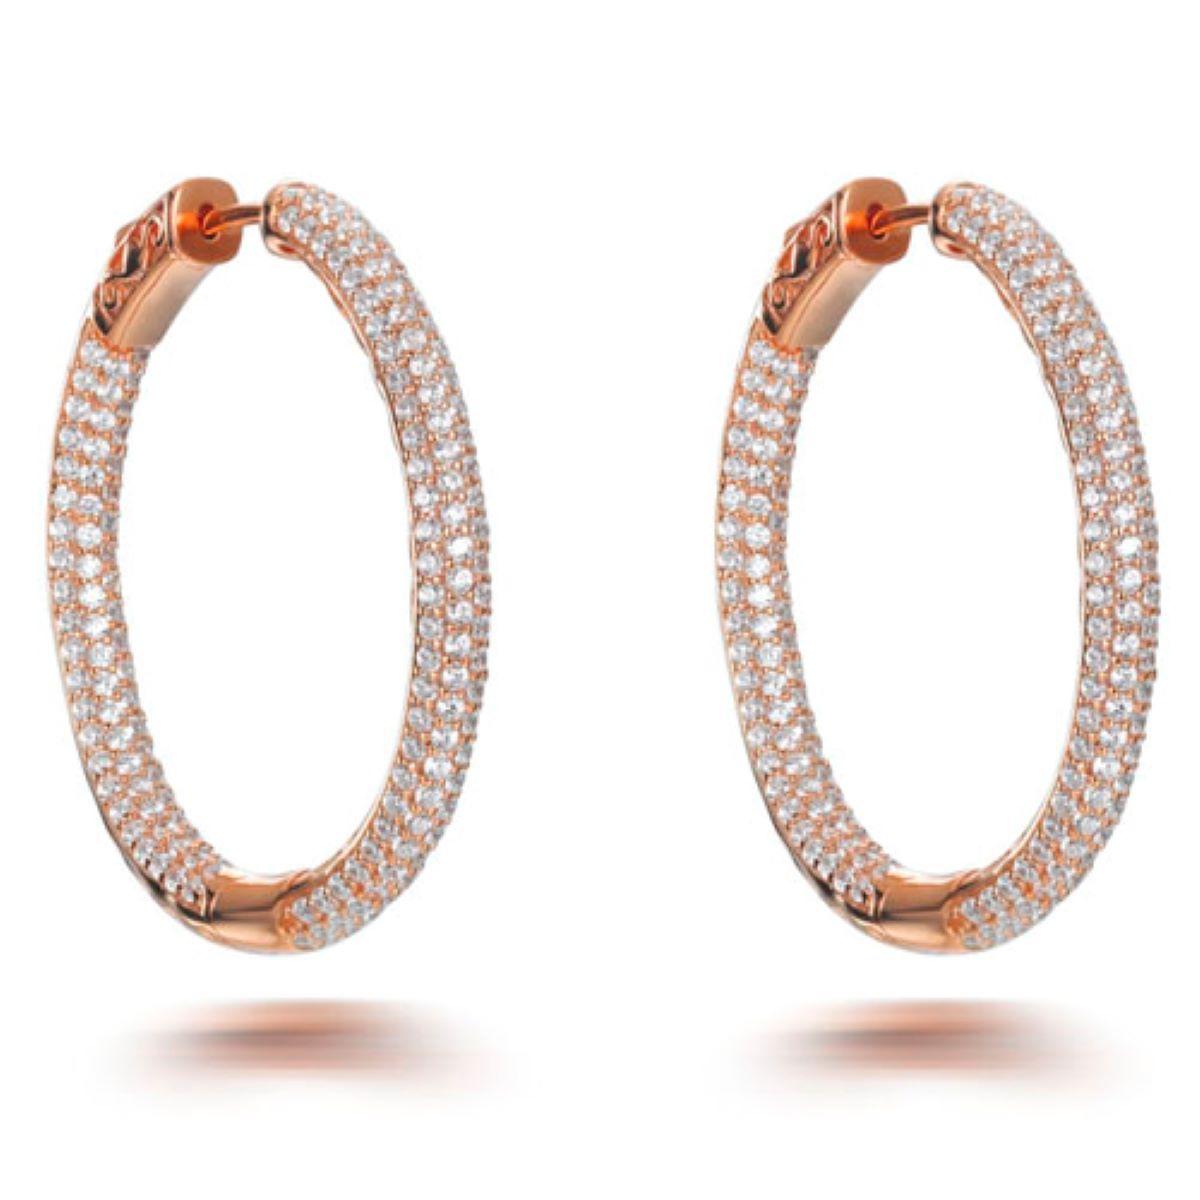 A twist on the wardrobe staple, these shimmering hoop earrings will add a sparkling statement to any occasion.

Featuring 7.86ct of round brilliant cut cubic zirconia, set in 925 sterling silver with a 14kt rose gold finish.

Dimensions 35mm drop by